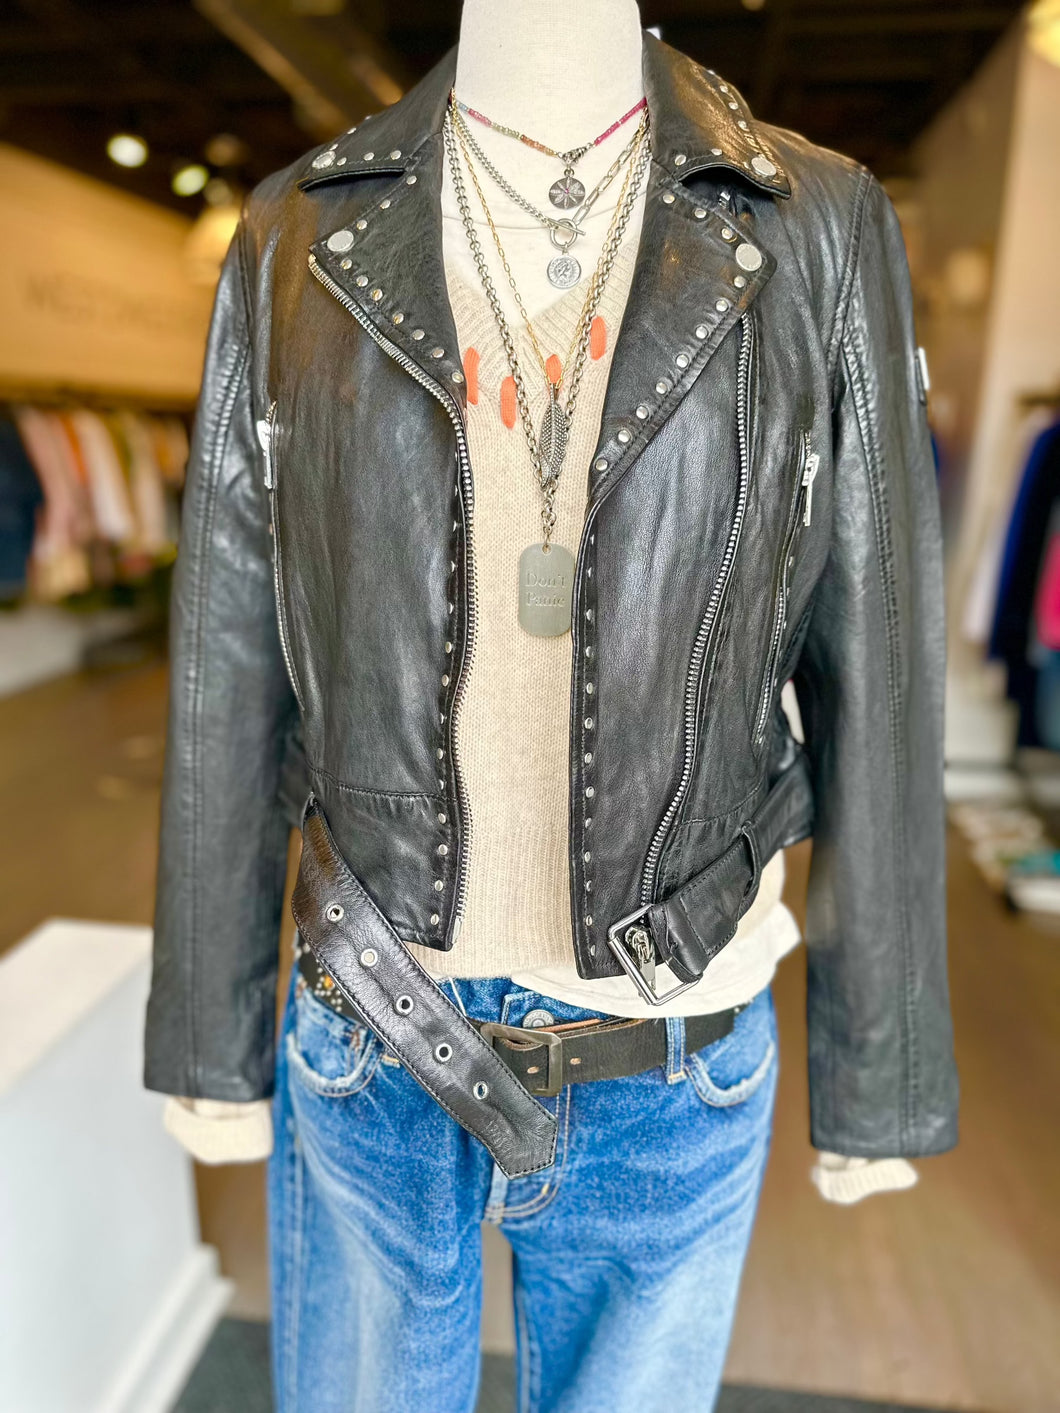 Don't Panic necklace with black leather moto jacket and moussy jeans at west2westport.com